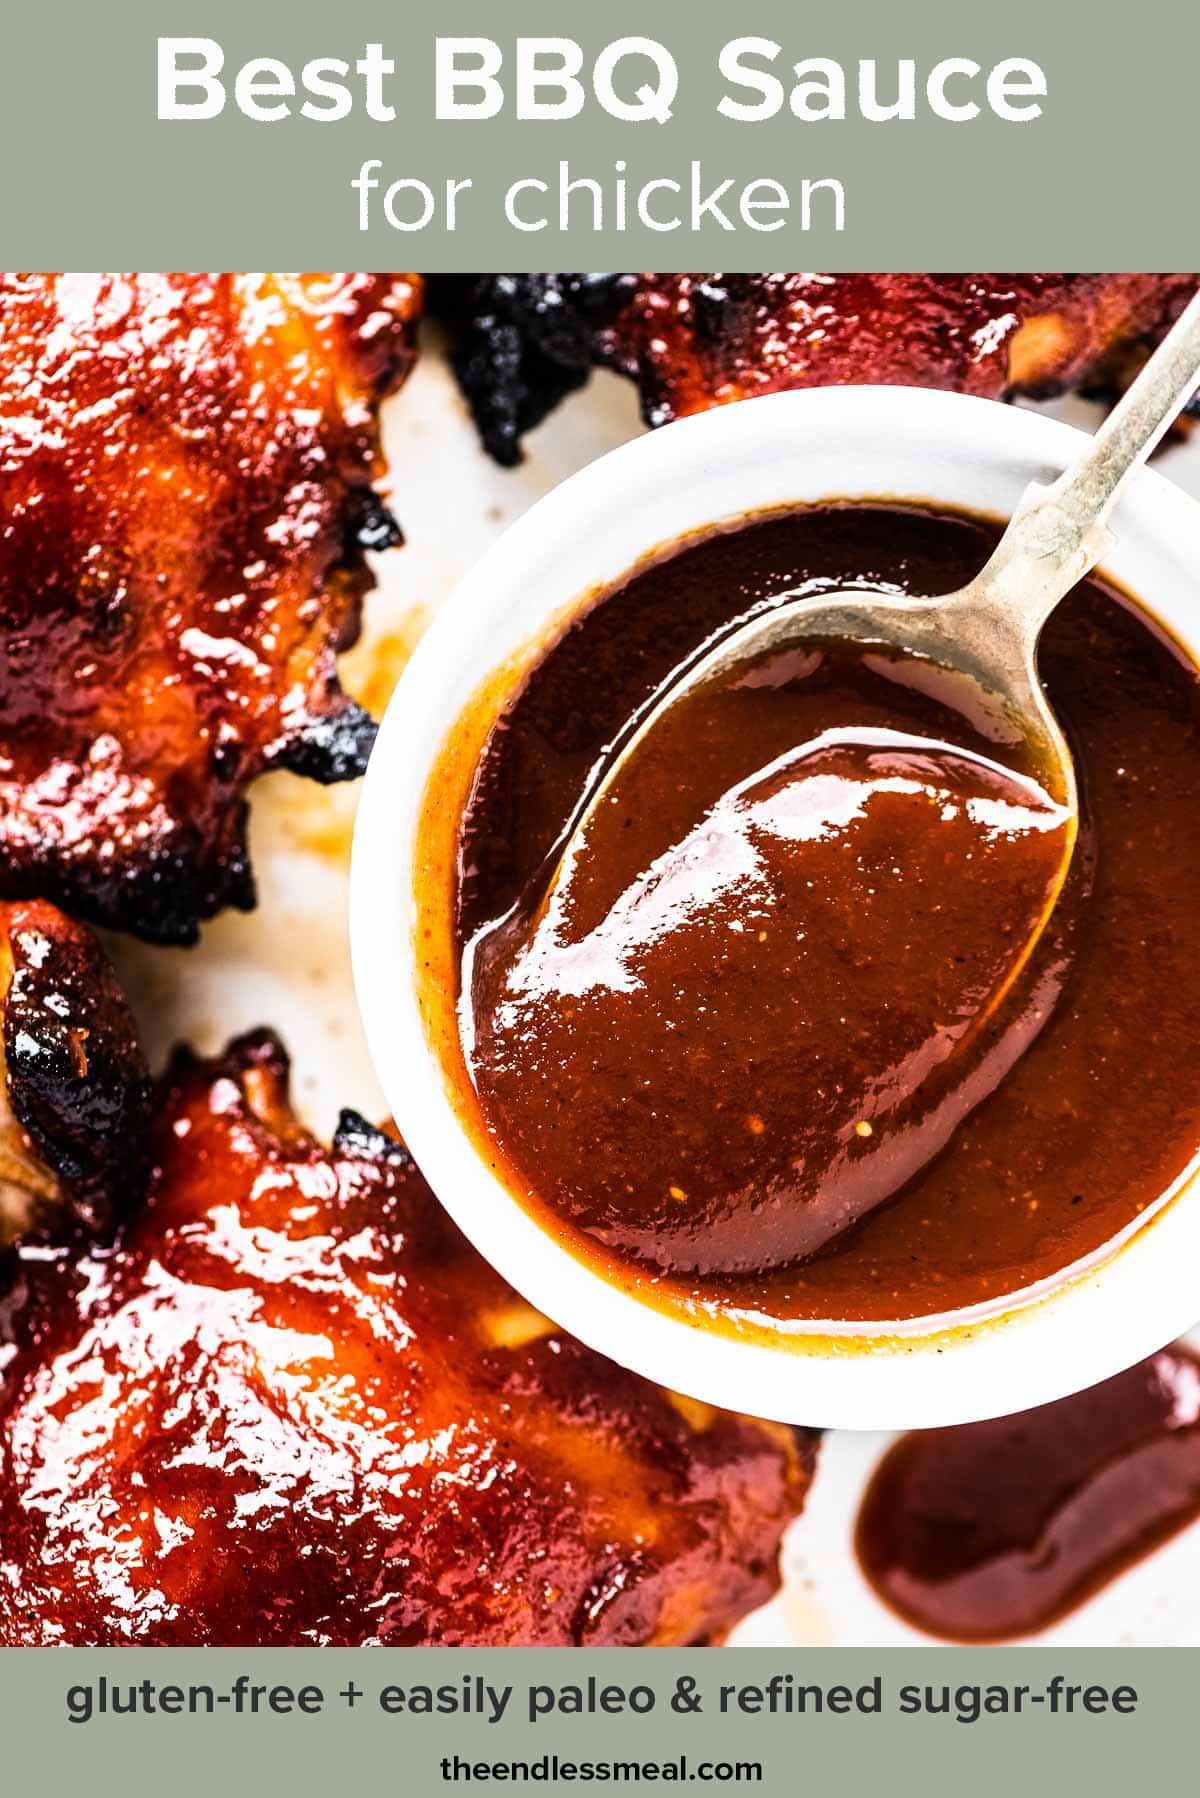 A spoon scooping some bbq sauce for chicken with bbq chicken on the side and the recipe title on top of the picture.